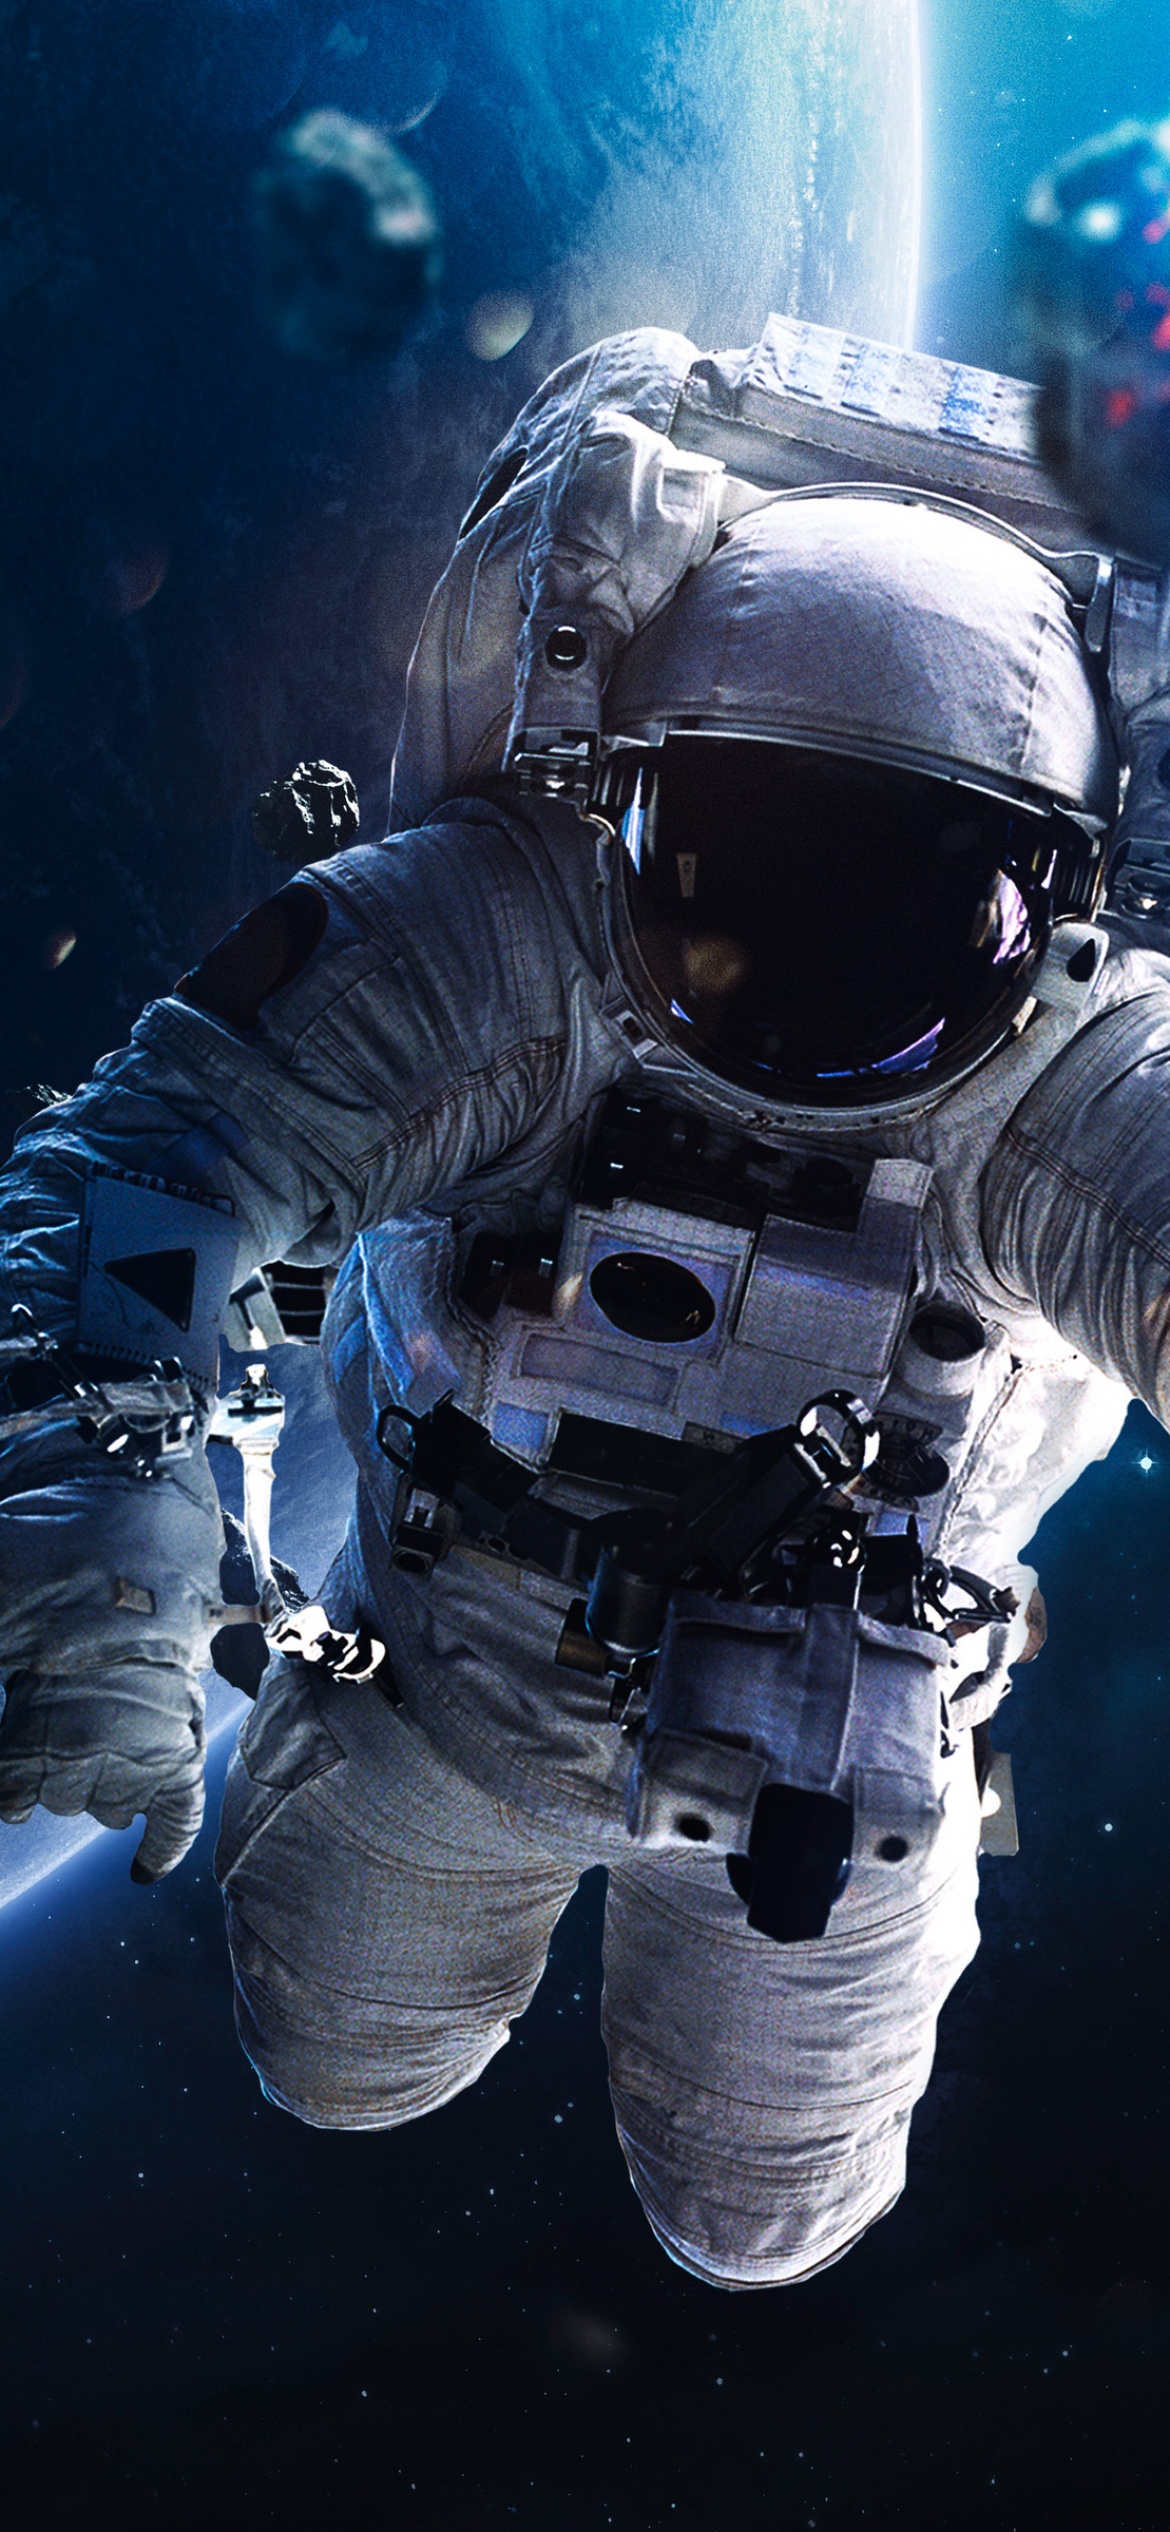 Free download Astronaut Wallpapers for Iphone 7 Iphone 7 plus Iphone 6  1080x1920 for your Desktop Mobile  Tablet  Explore 72 Astronaut  Wallpaper  Cool Astronaut Wallpapers Burning Astronaut Wallpaper Sloth Astronaut  Wallpaper